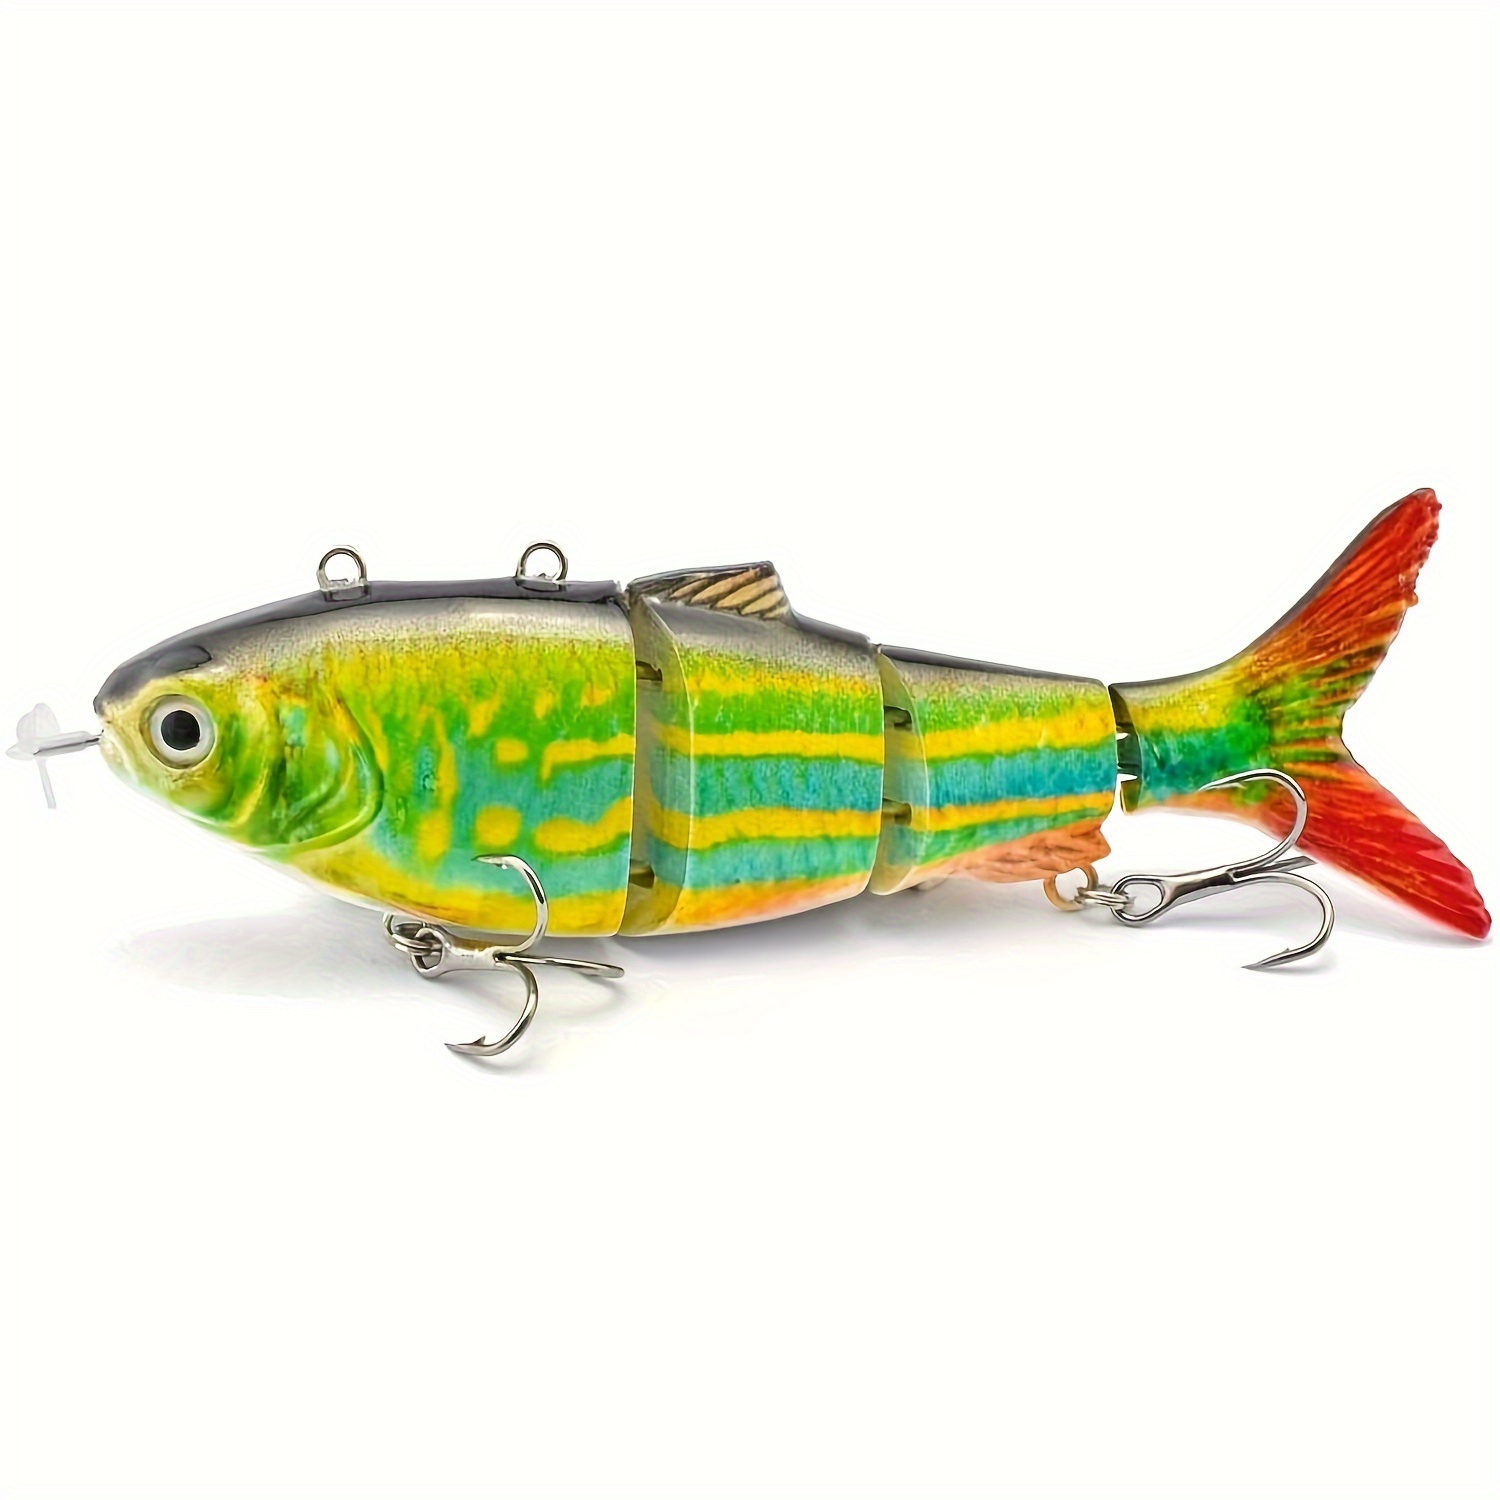 Robotic Swimming Fishing Electric Lures 5.12 USB Rechargeable